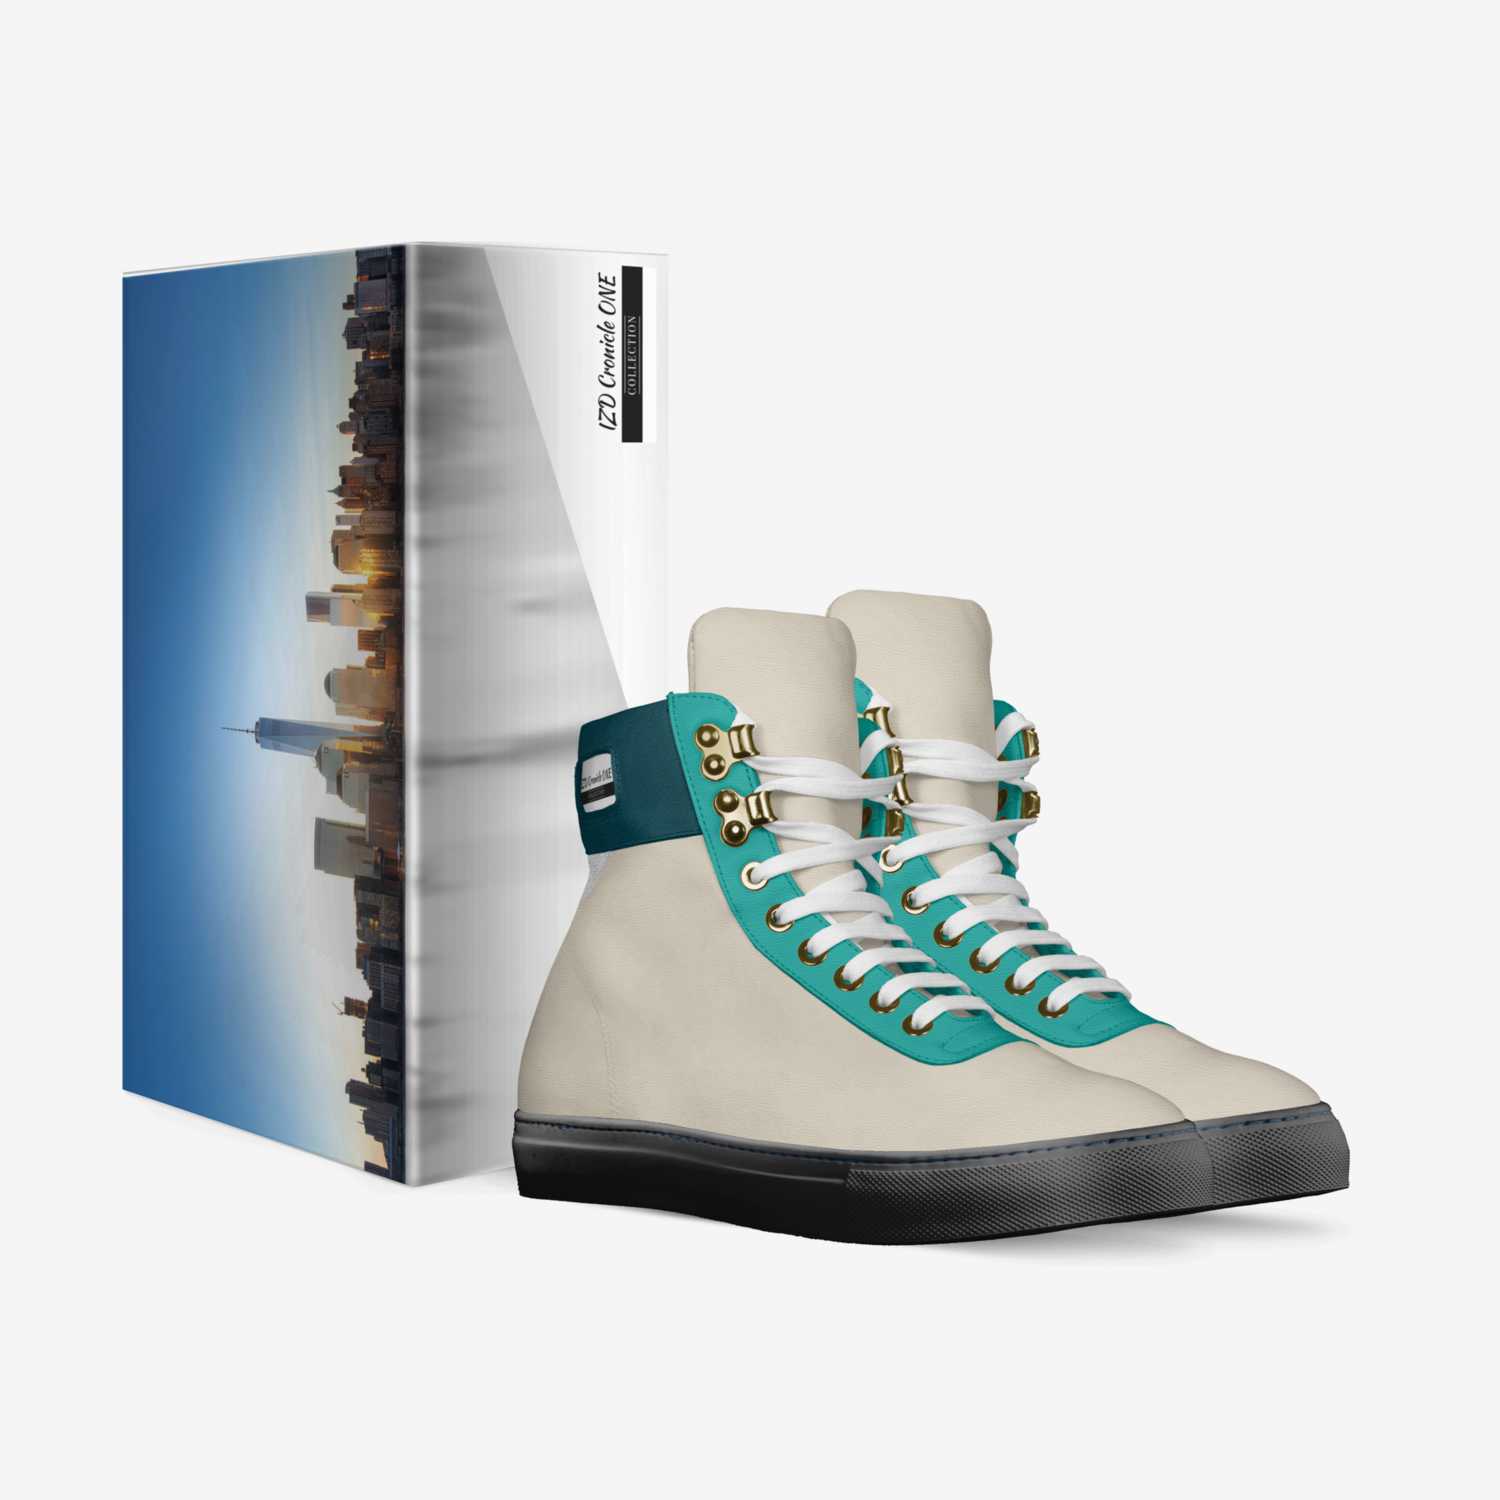 IZD Cronicle ONE custom made in Italy shoes by Isaac Dearmore | Box view